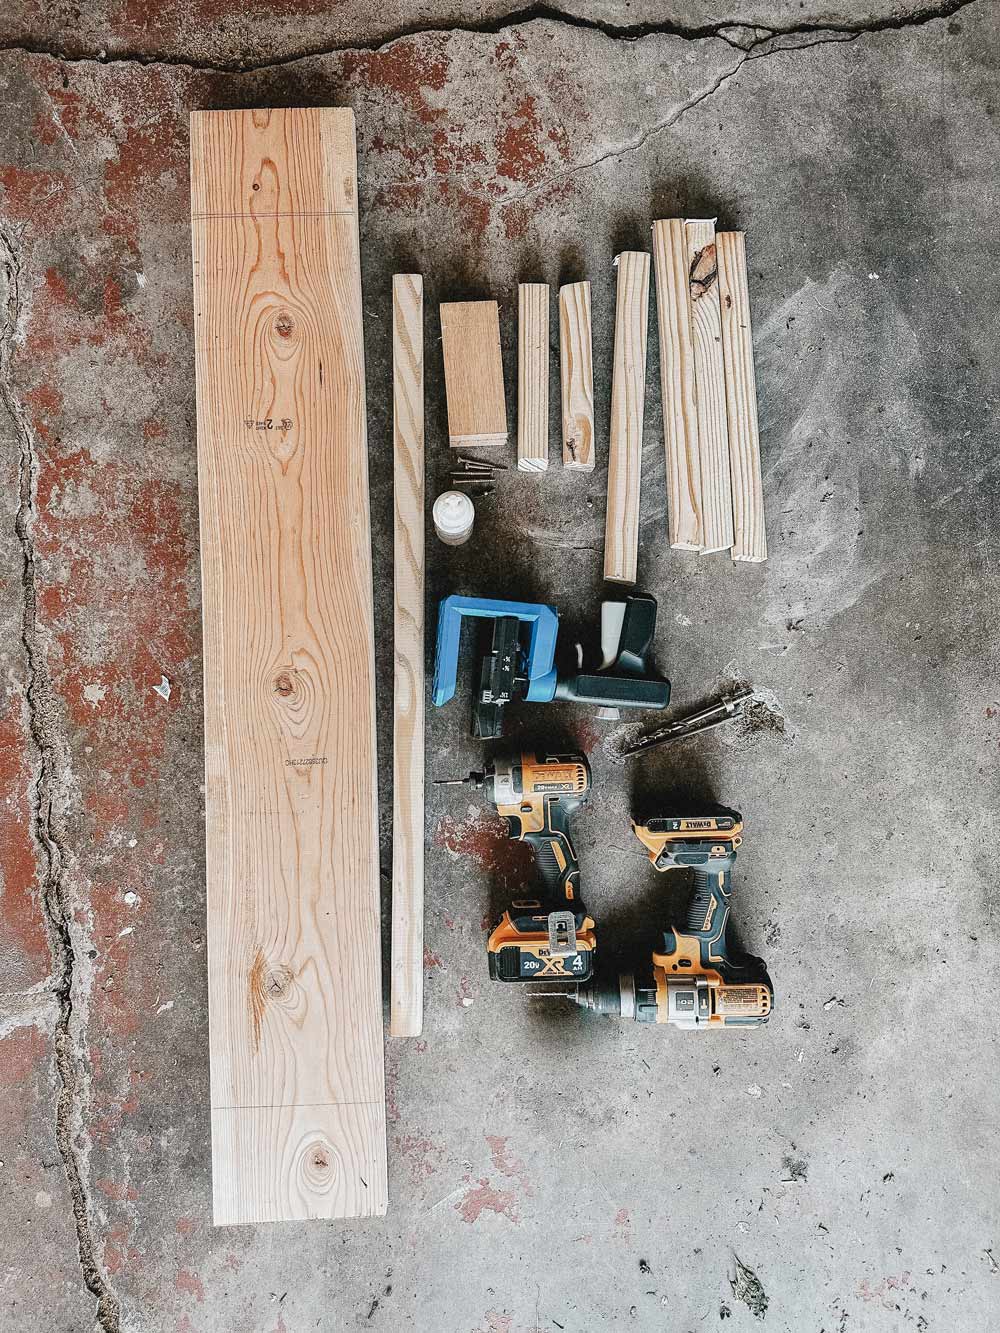 Tools and lumber laid out on the floor.